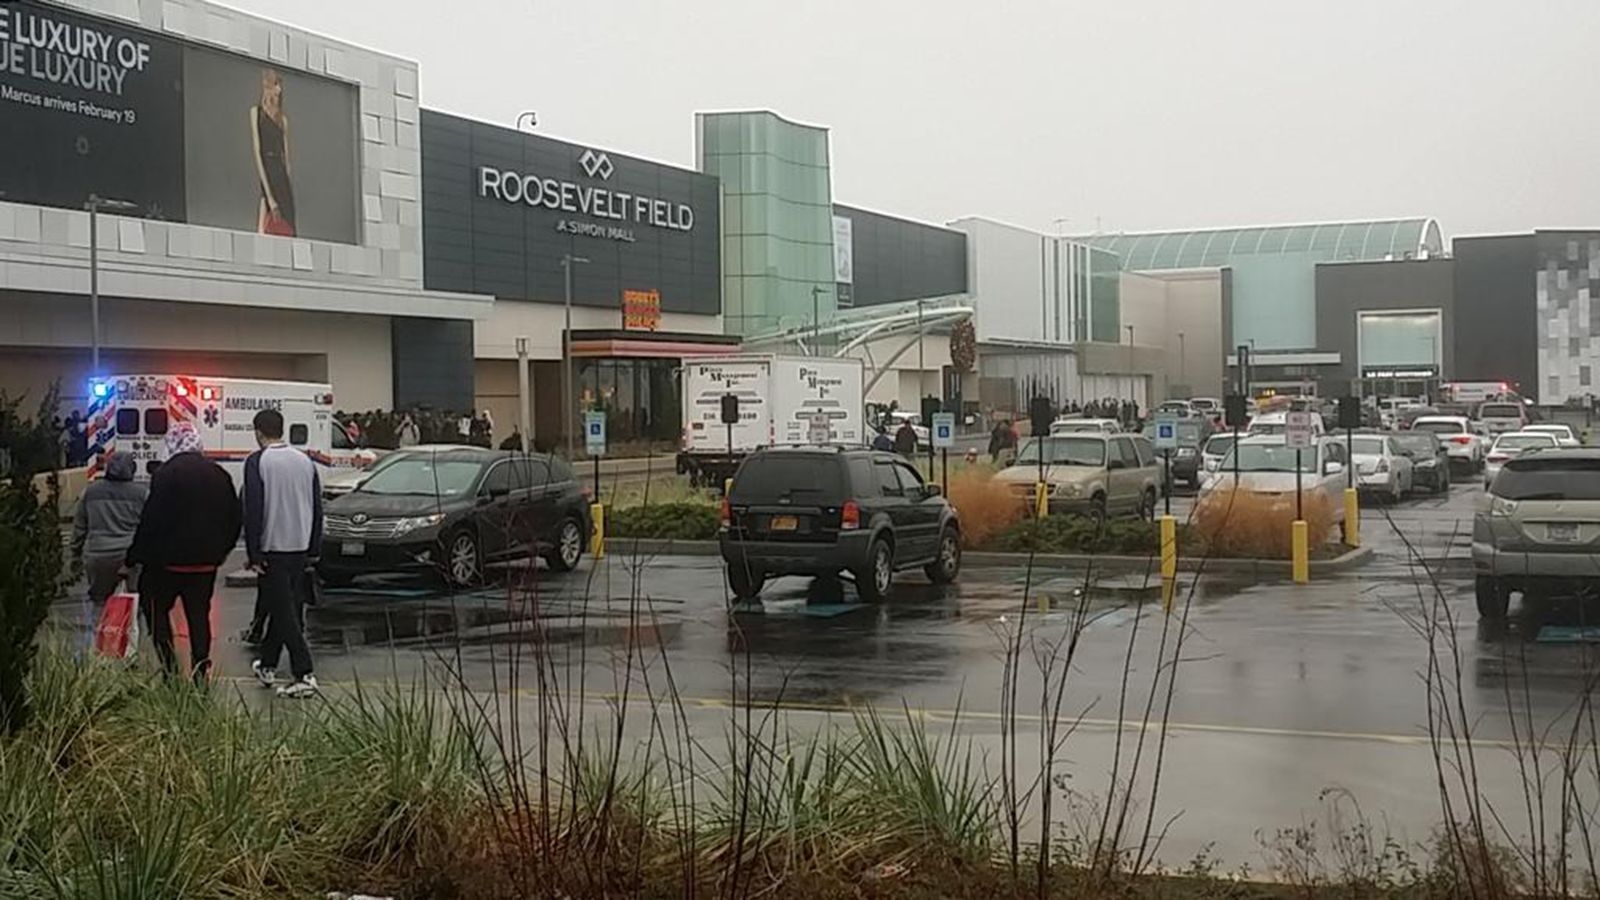 Recent incidents at Roosevelt Field Mall spark safety concerns 